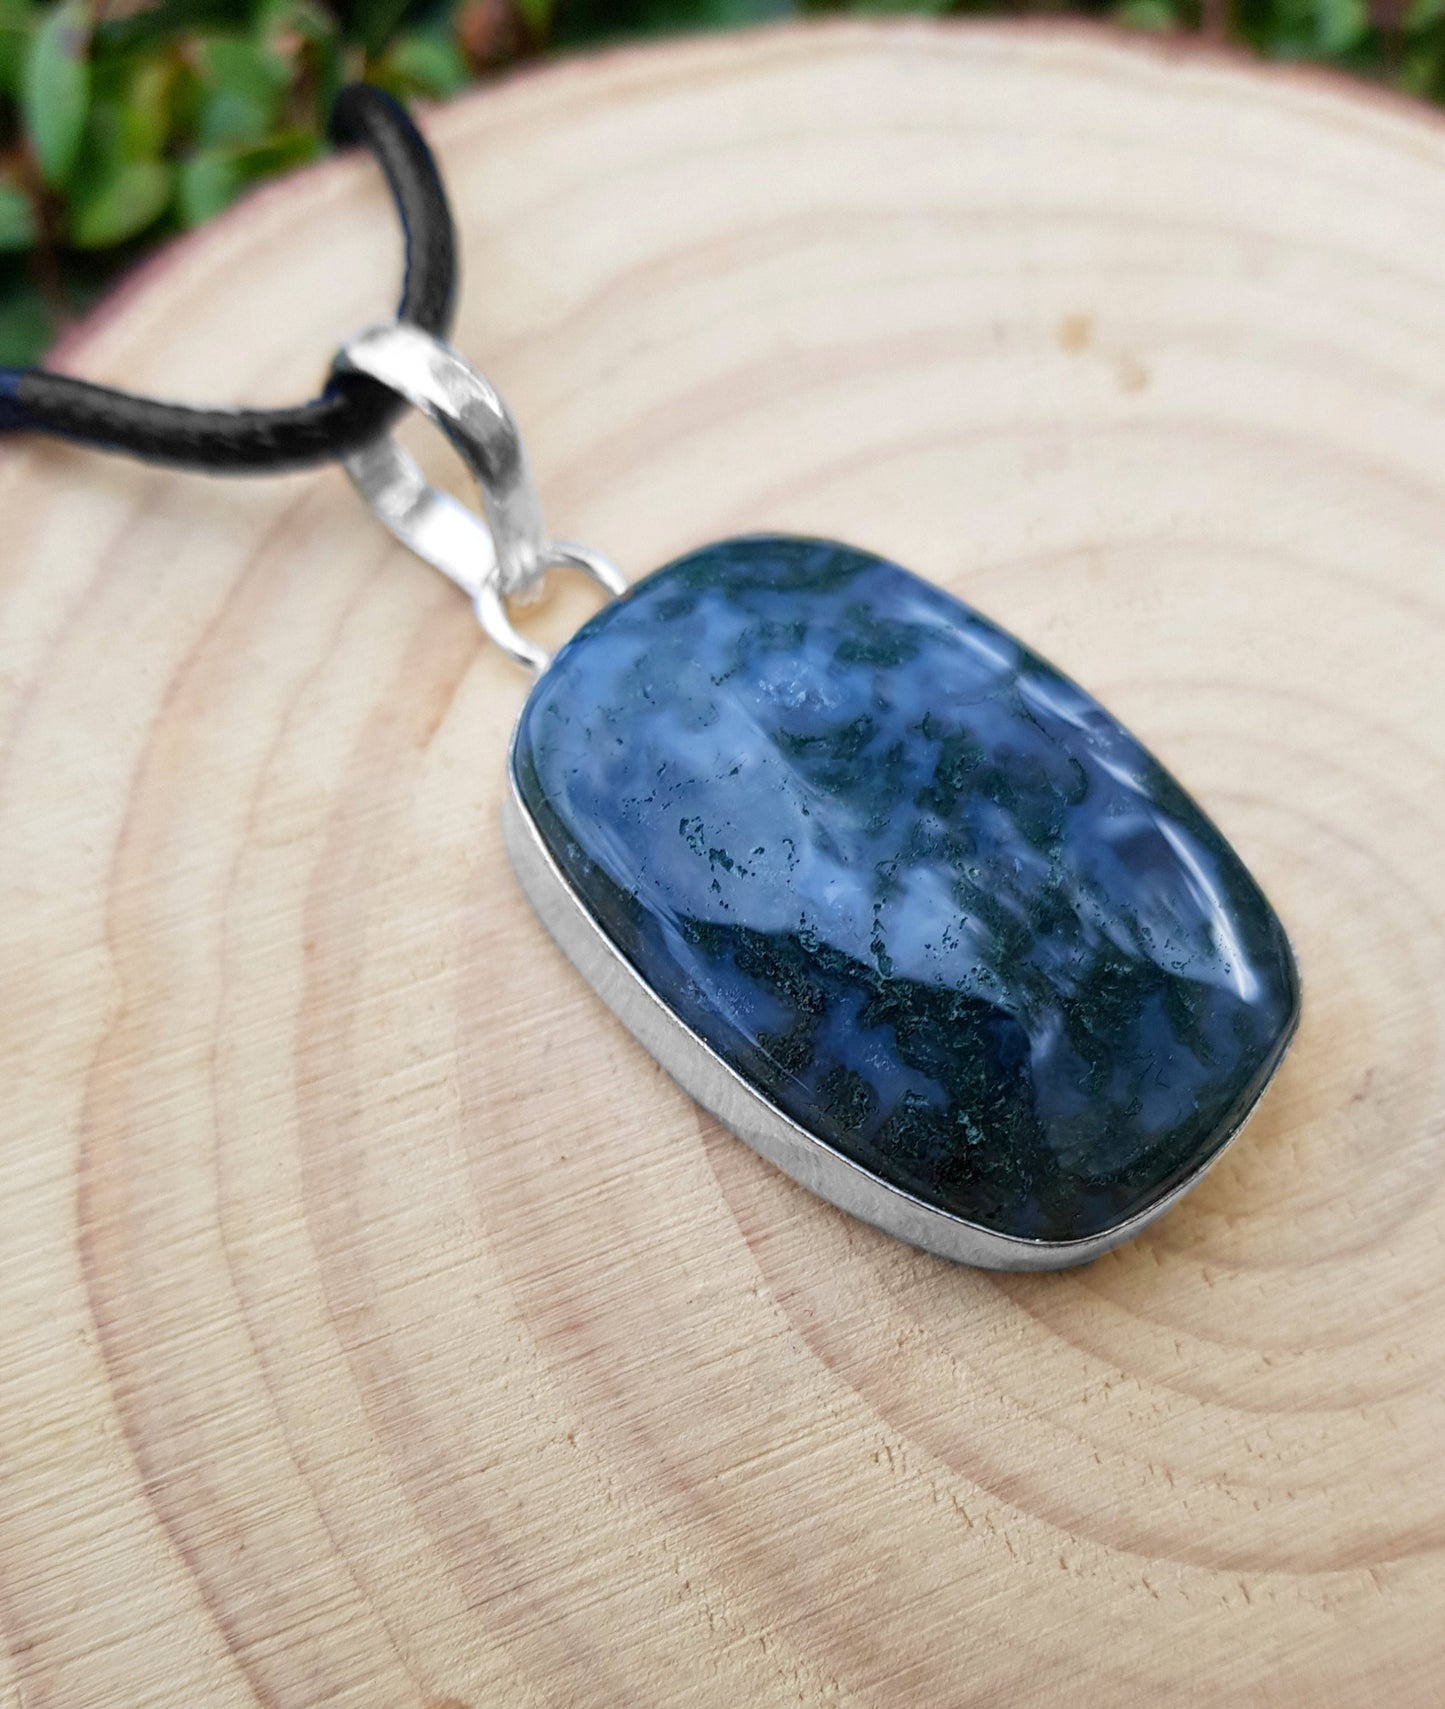 Moss Agate Pendant Statement Necklace In Sterling Silver Boho Gemstone Pendant One Of A Kind Jewelry Unique Gift